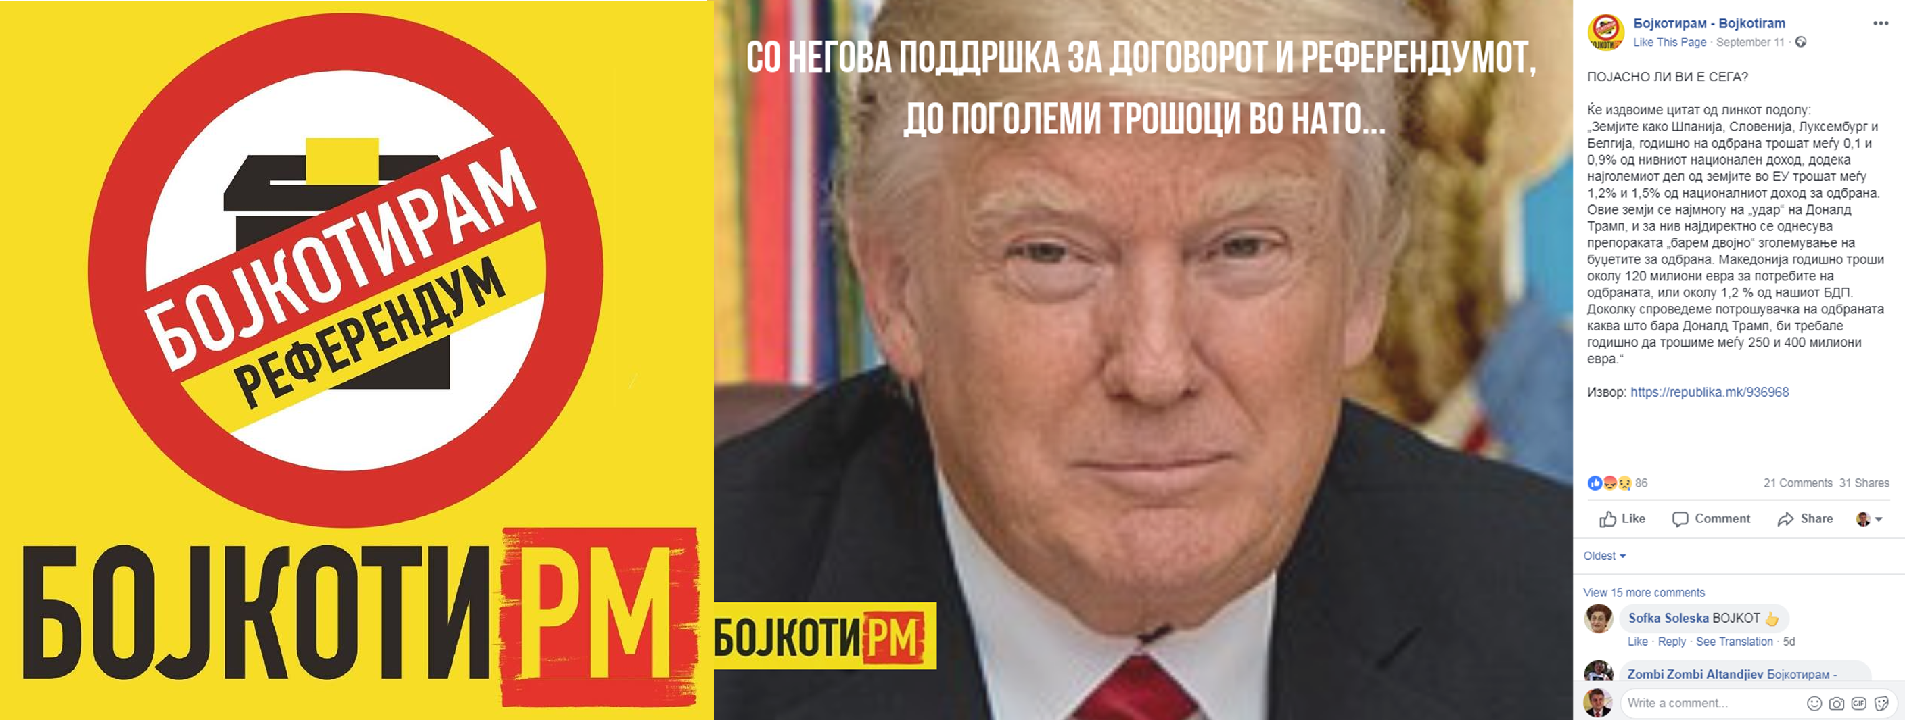 #ElectionWatch: Trumped Up and Down in Macedonia